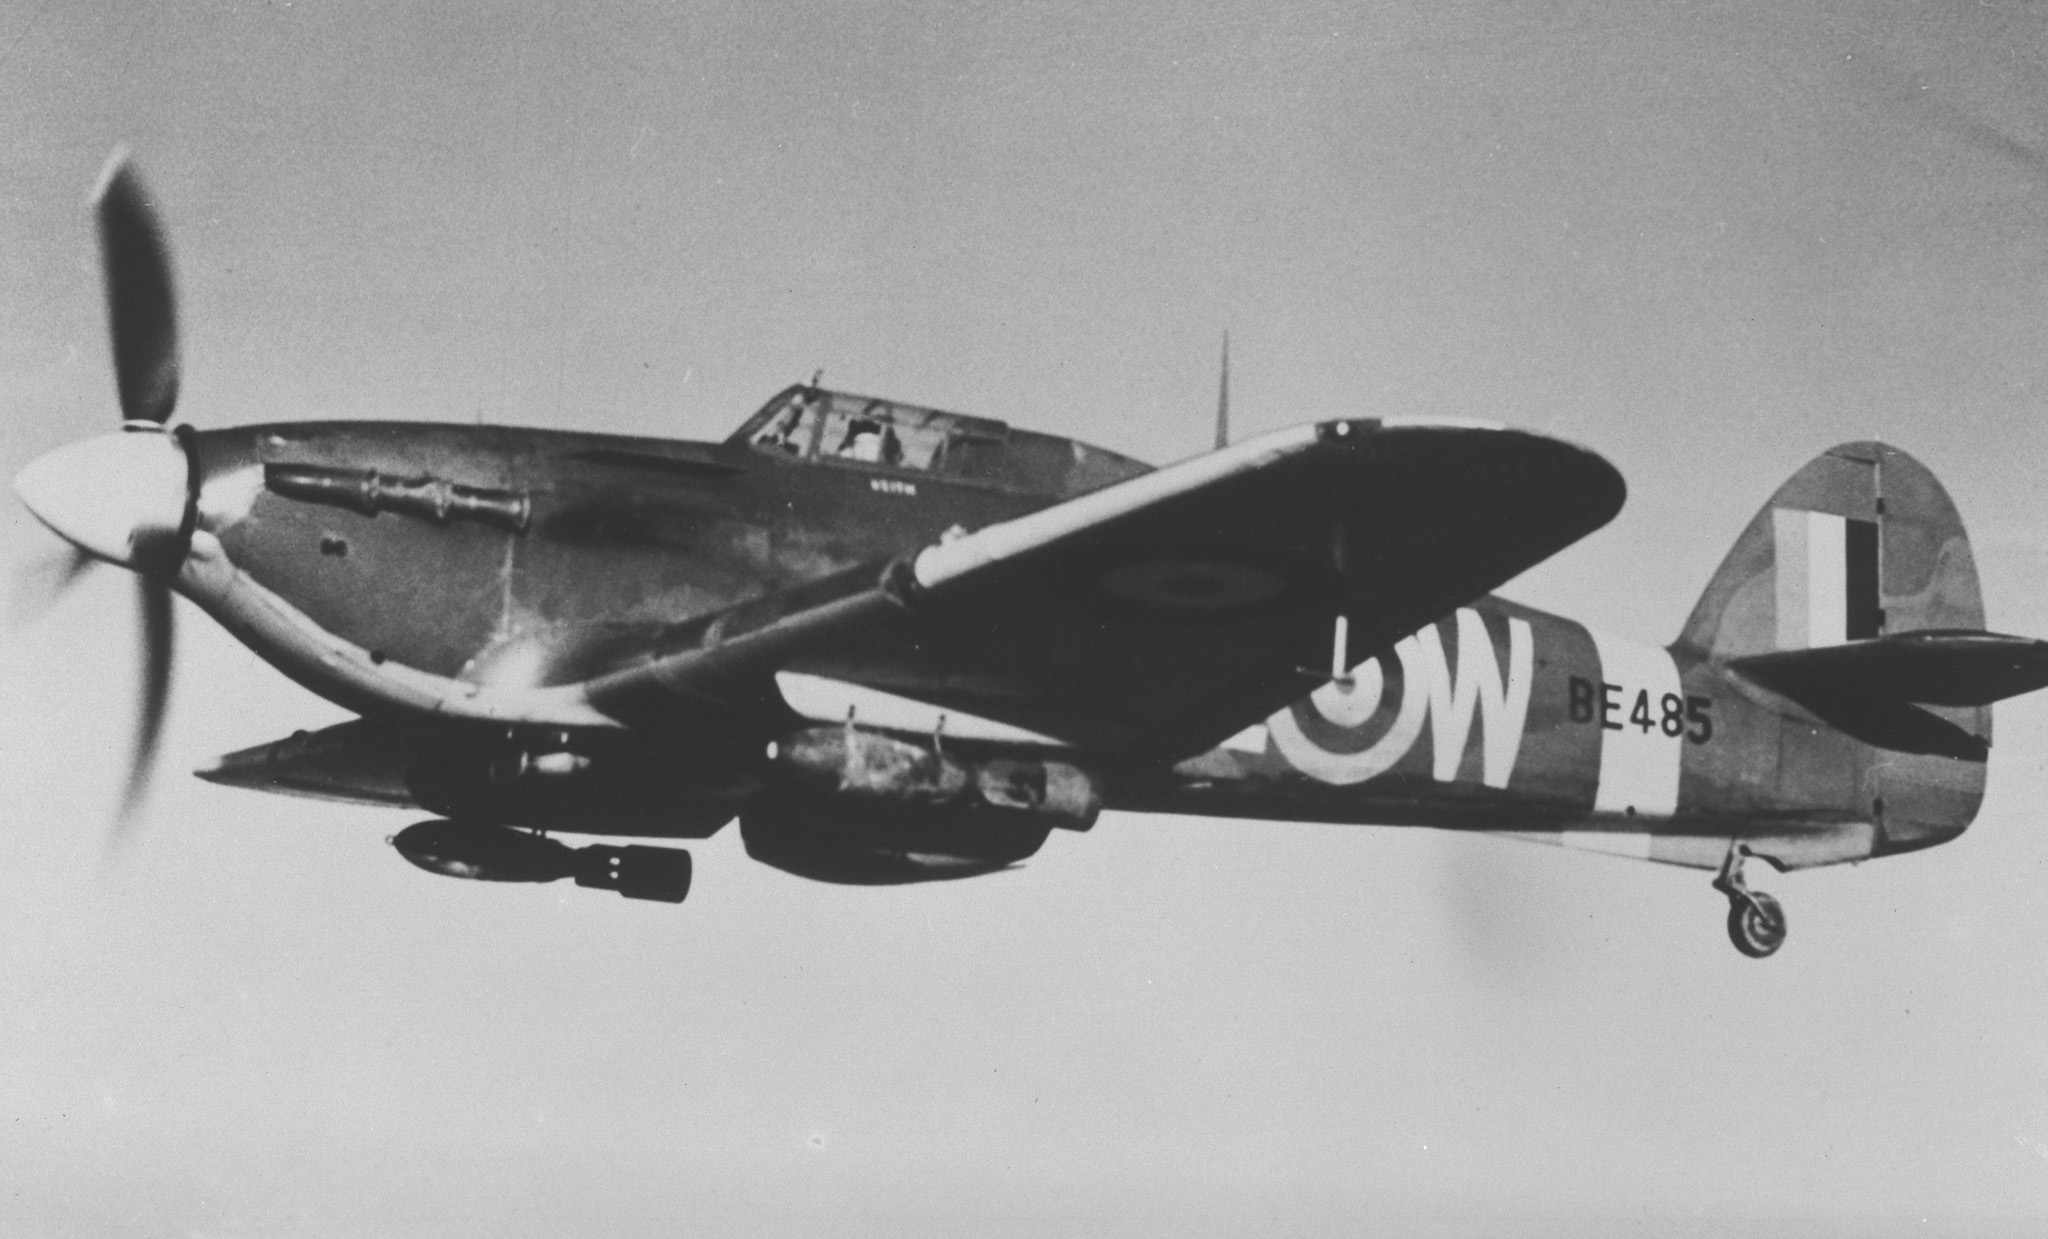 A Hawker Hurricane Mk IIB from 402 (Fighter) Squadron crosses the English Channel on an intruder sortie into occupied France in 1941. It carries 250 pound bombs slung under its wings PHOTO: DND Archives, PL-6897